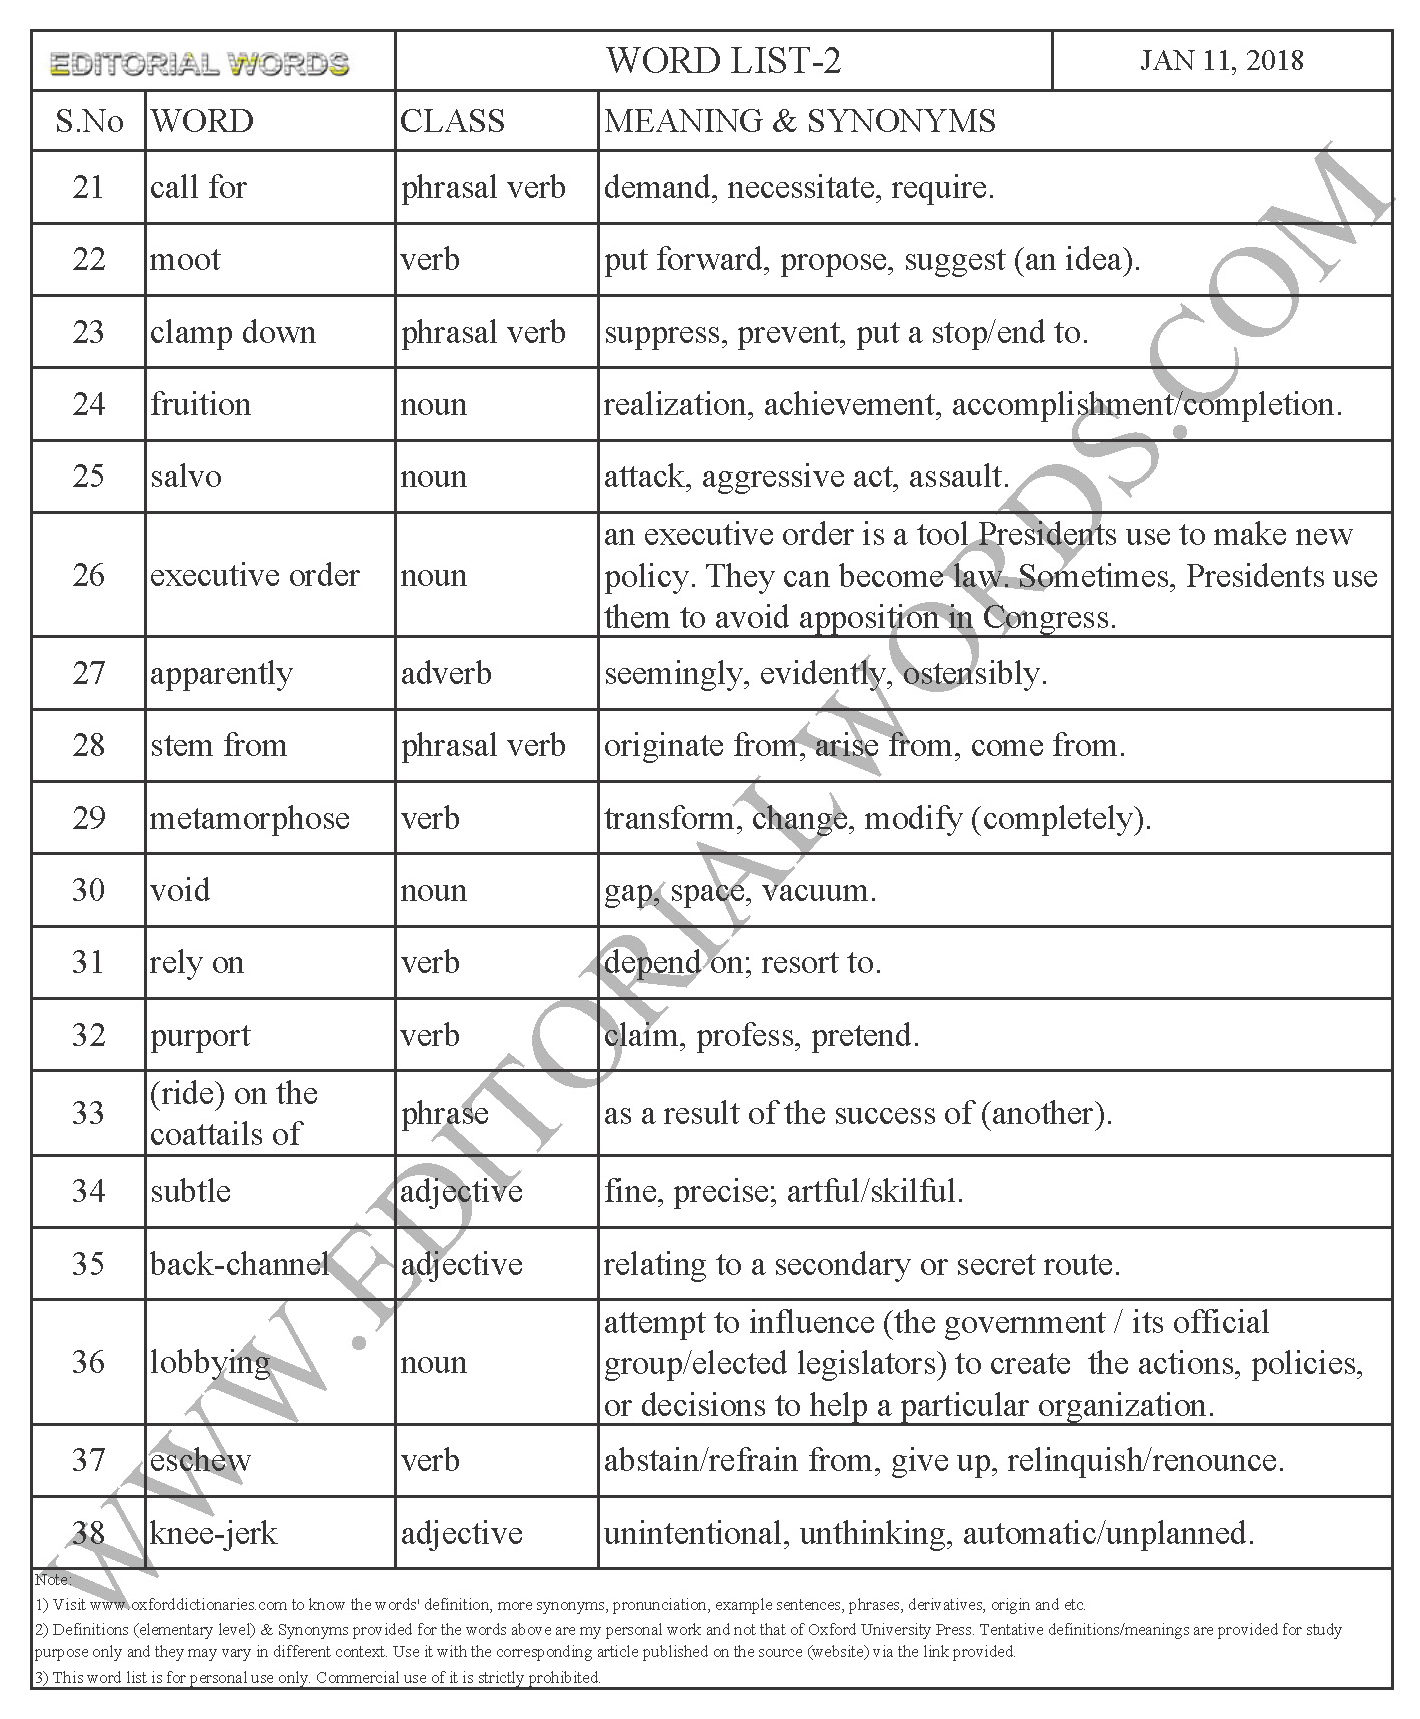 EDITORIAL WORDS TO IMPROVE ENGLISH VOCABULARY 11JAN18_2a